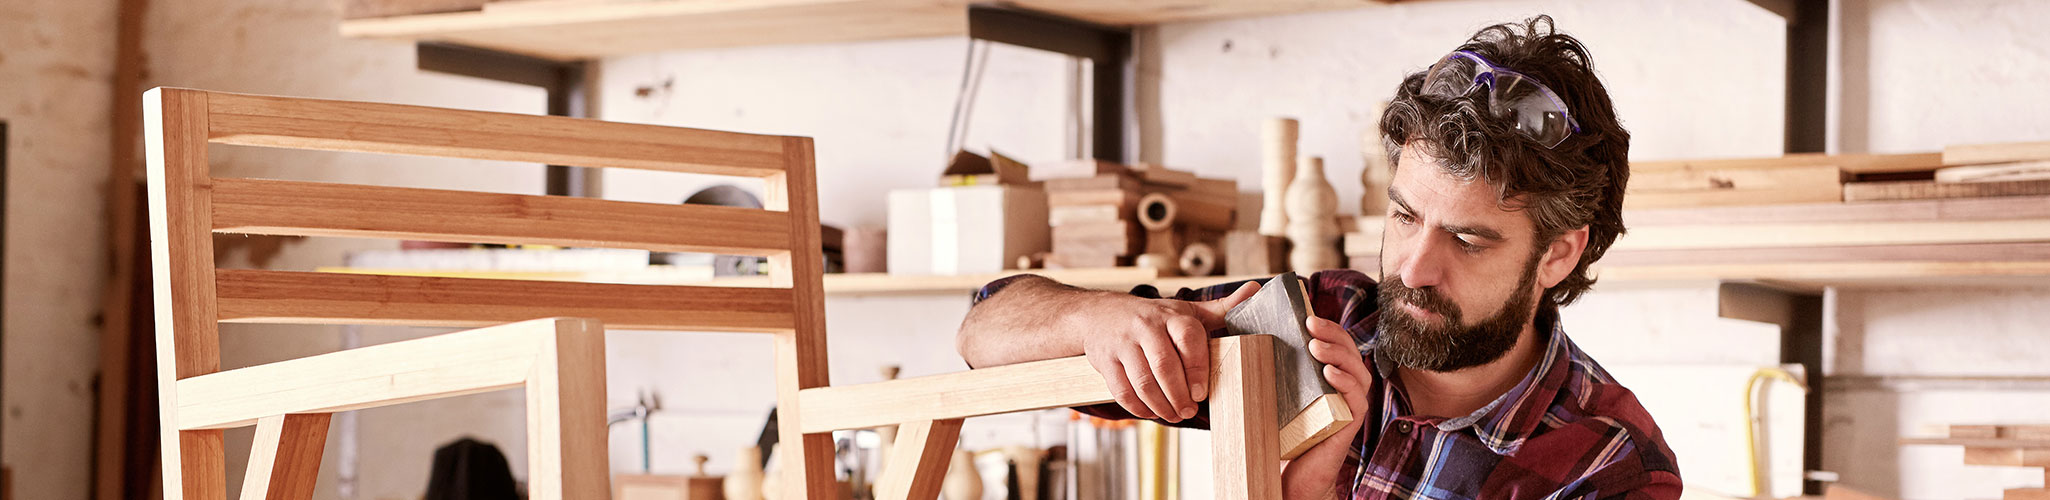 Bearded man building a chair in a workshop